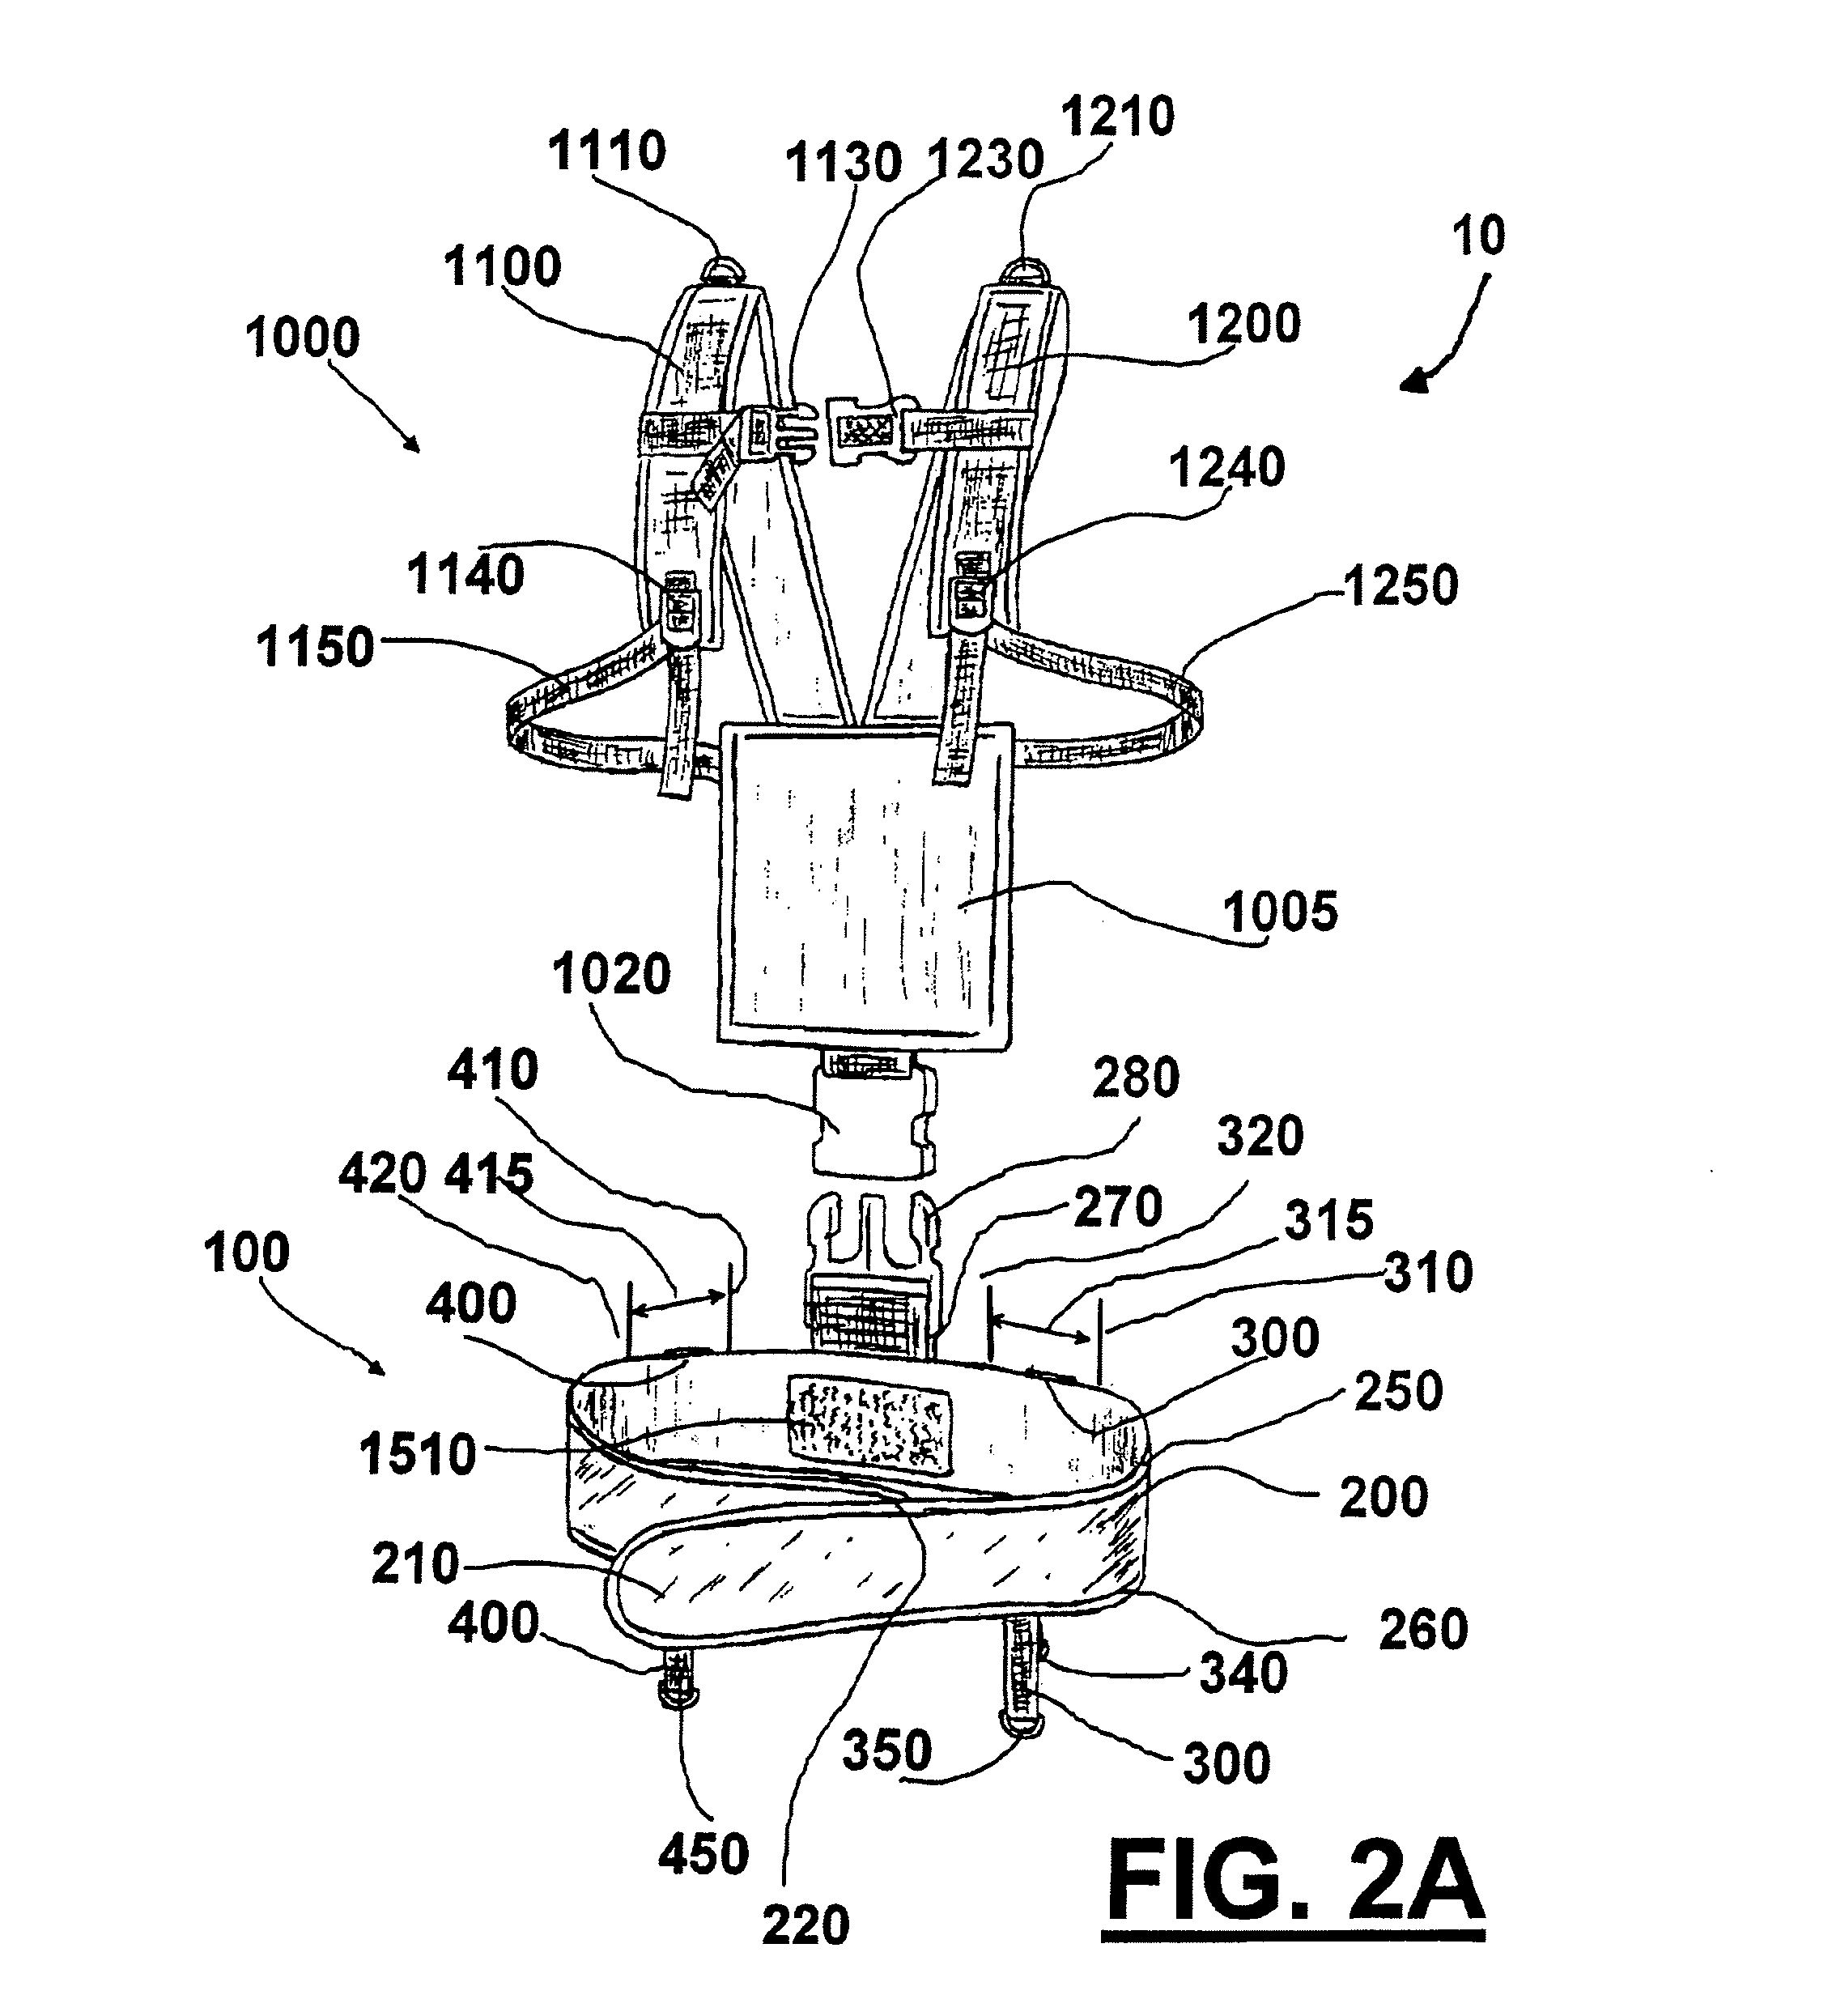 Rehabilitation exercise device and method for persons with injuries causing limited ranges of motion to one or more limbs